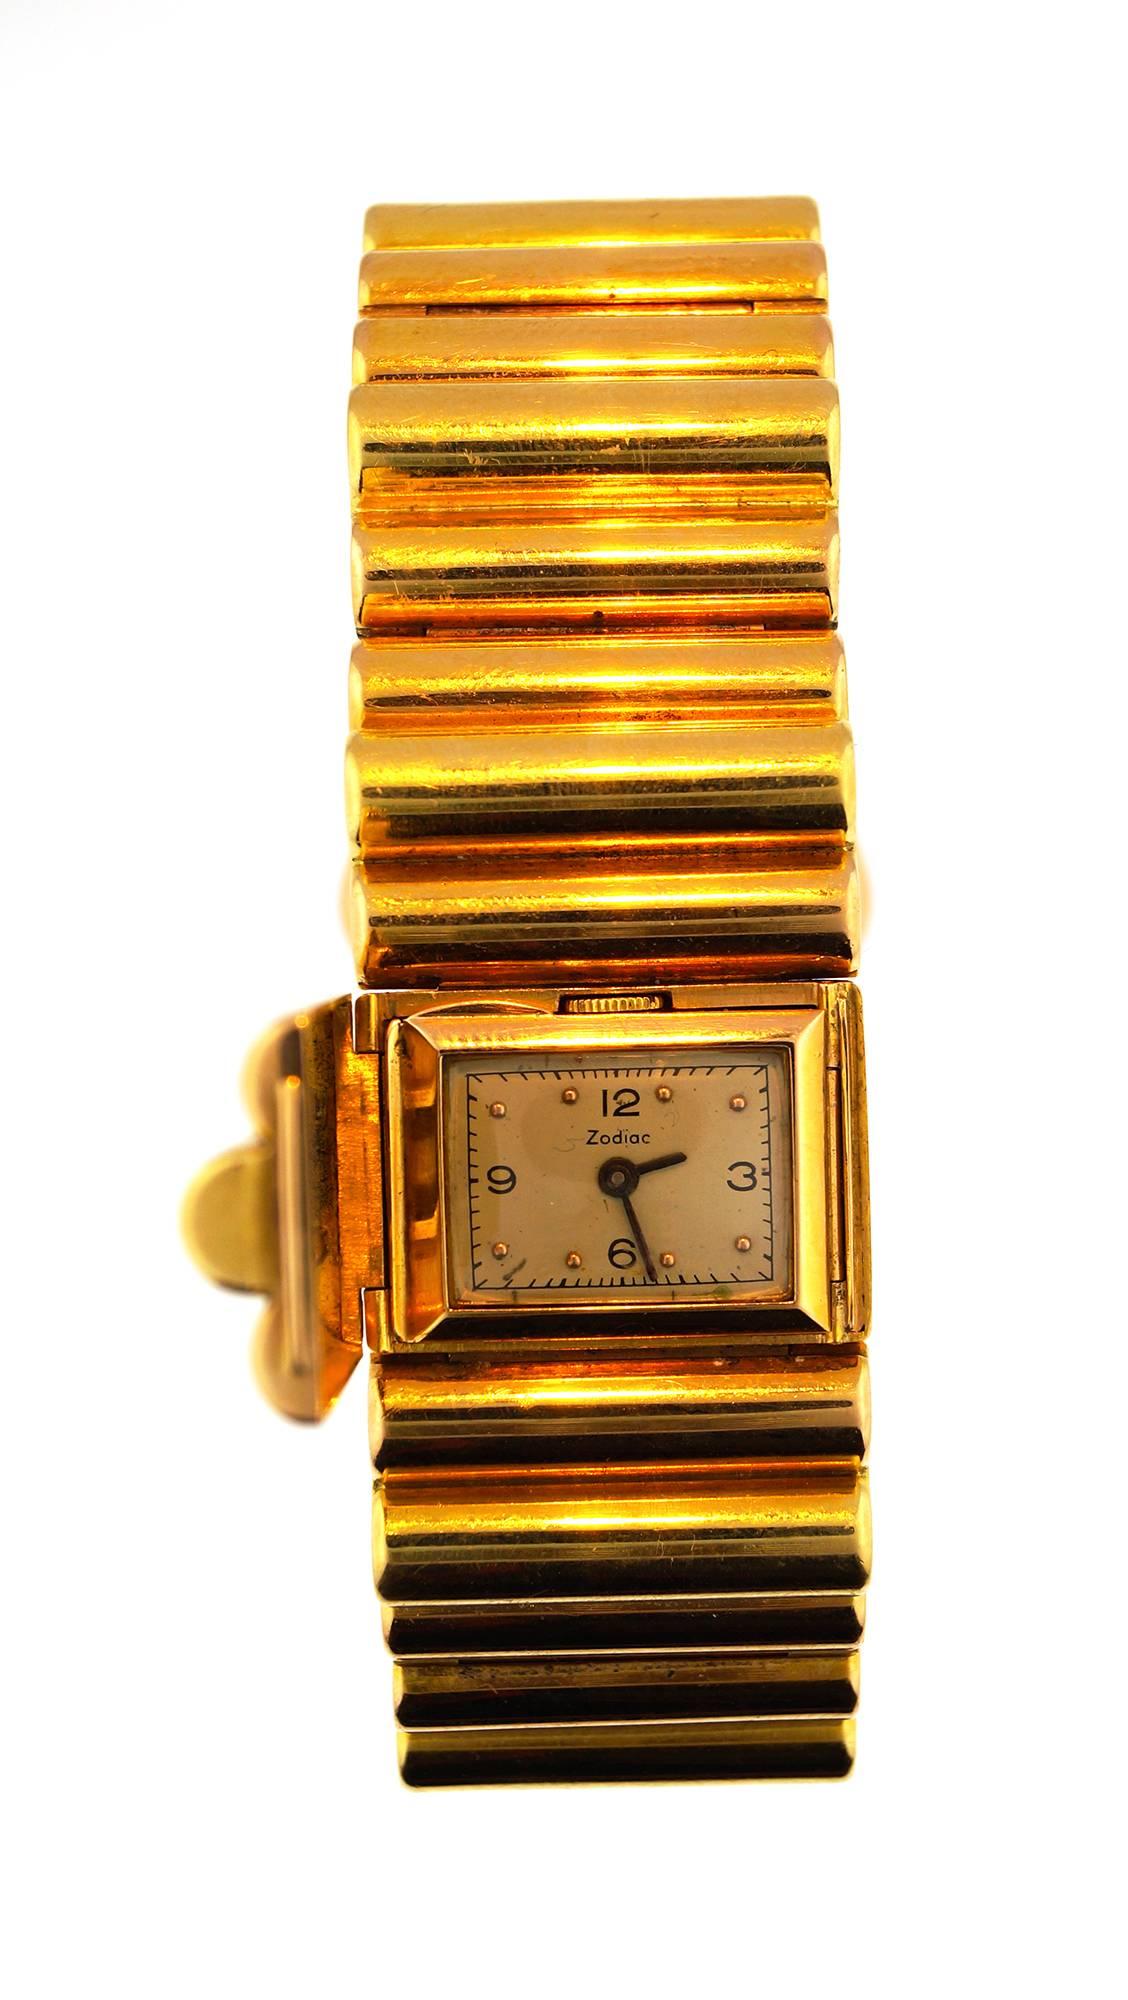 Fantastic 18K yellow gold tank watch with a Zodiac movement. This beautiful and quite rare retro bracelet is set with 11 gold links. One of which hides a watch dial. This transforms the watch into a beautiful piece of retro jewelry. 
The watch